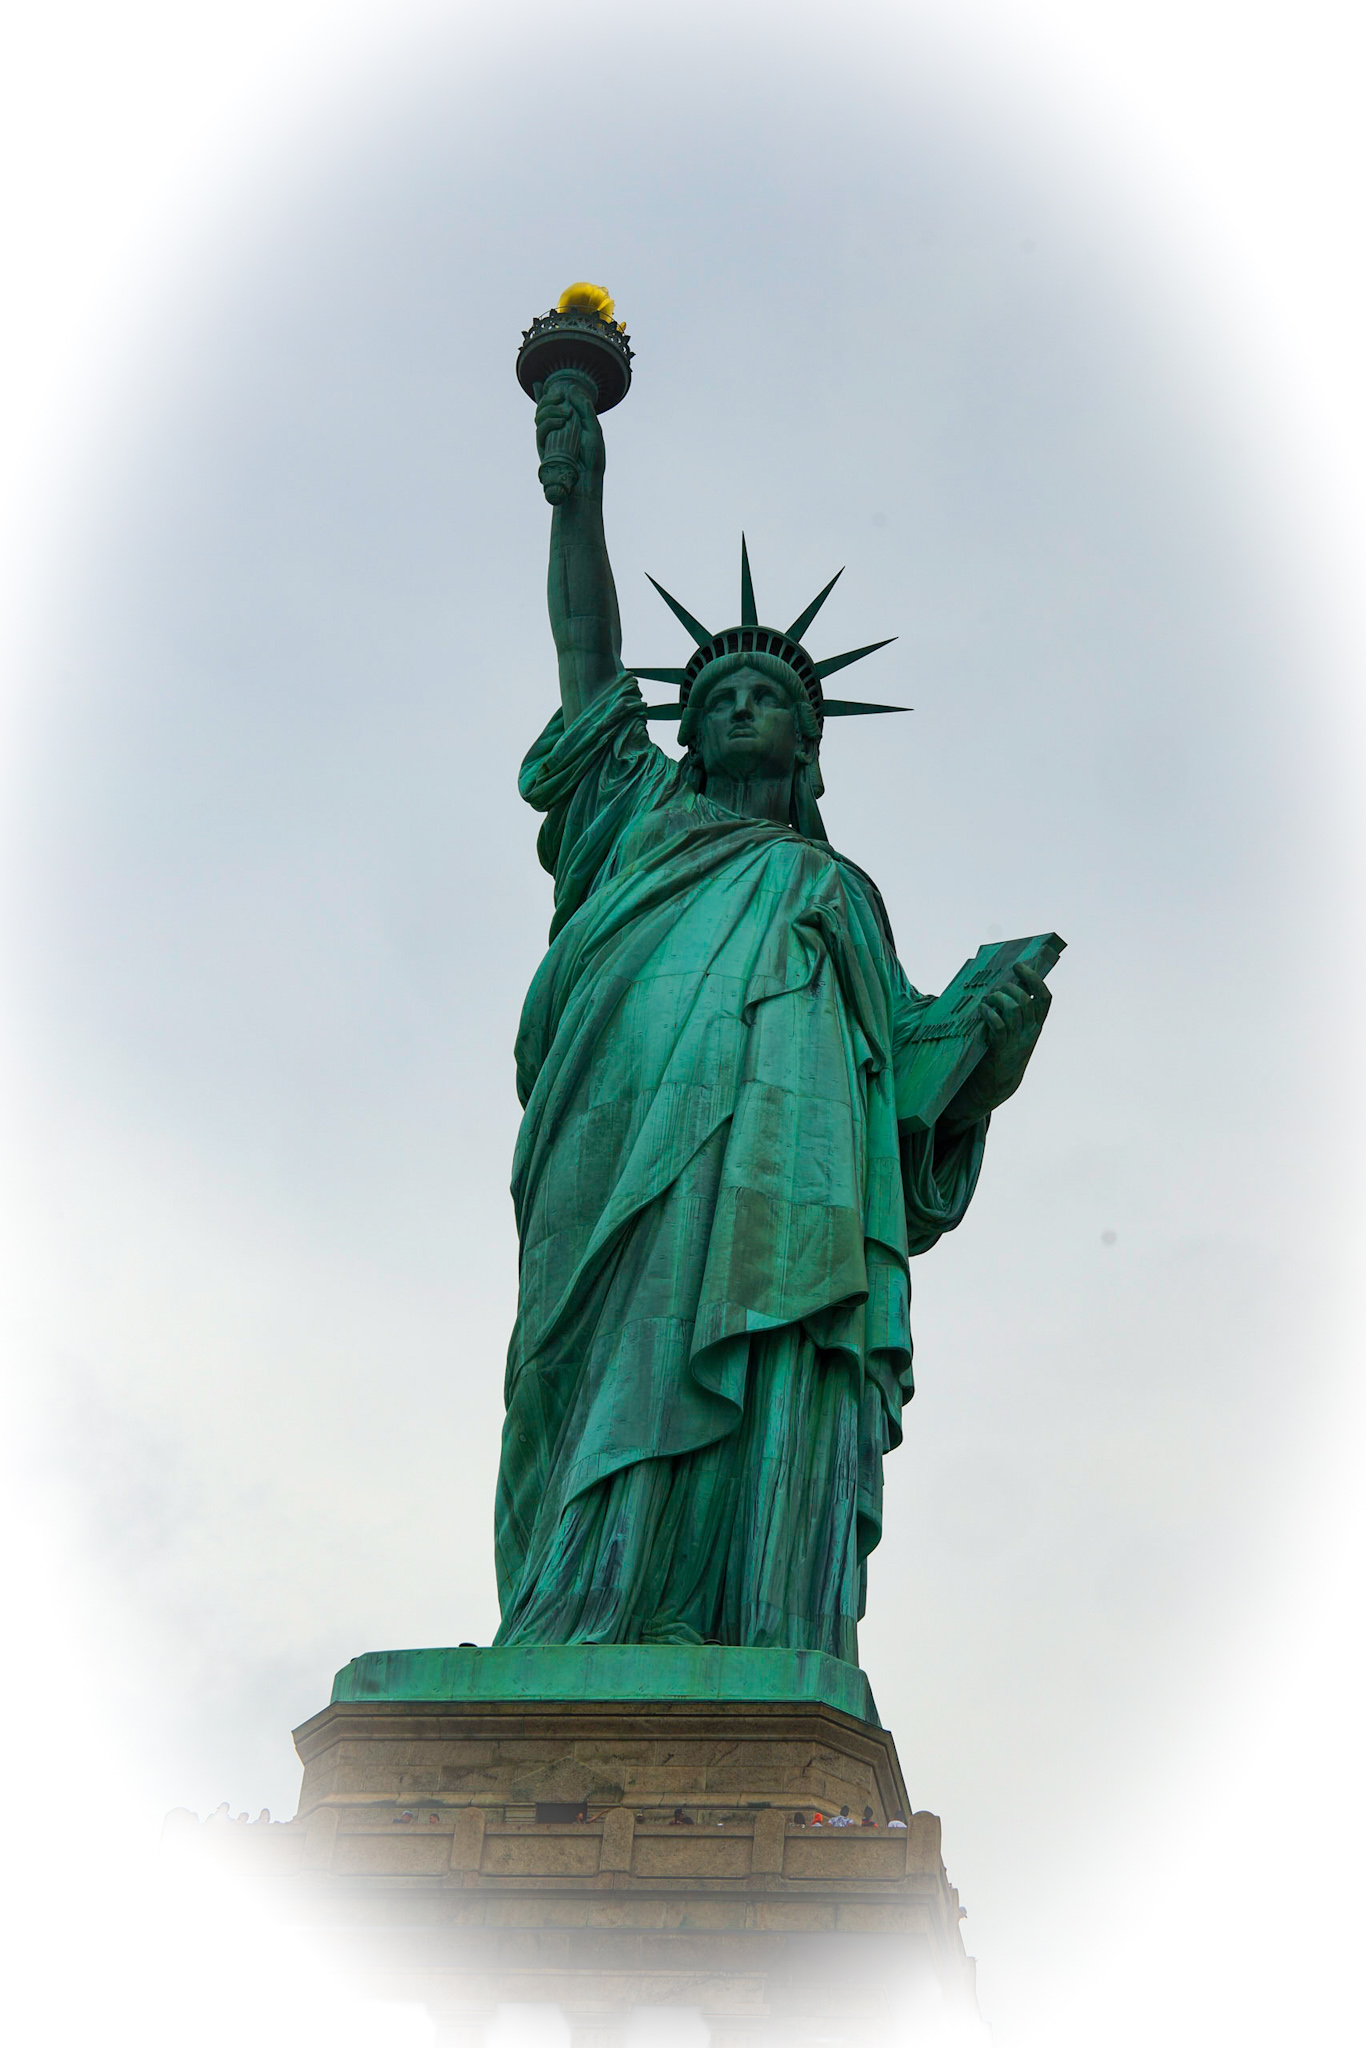 A Visit to Lady Liberty and Ellis Island